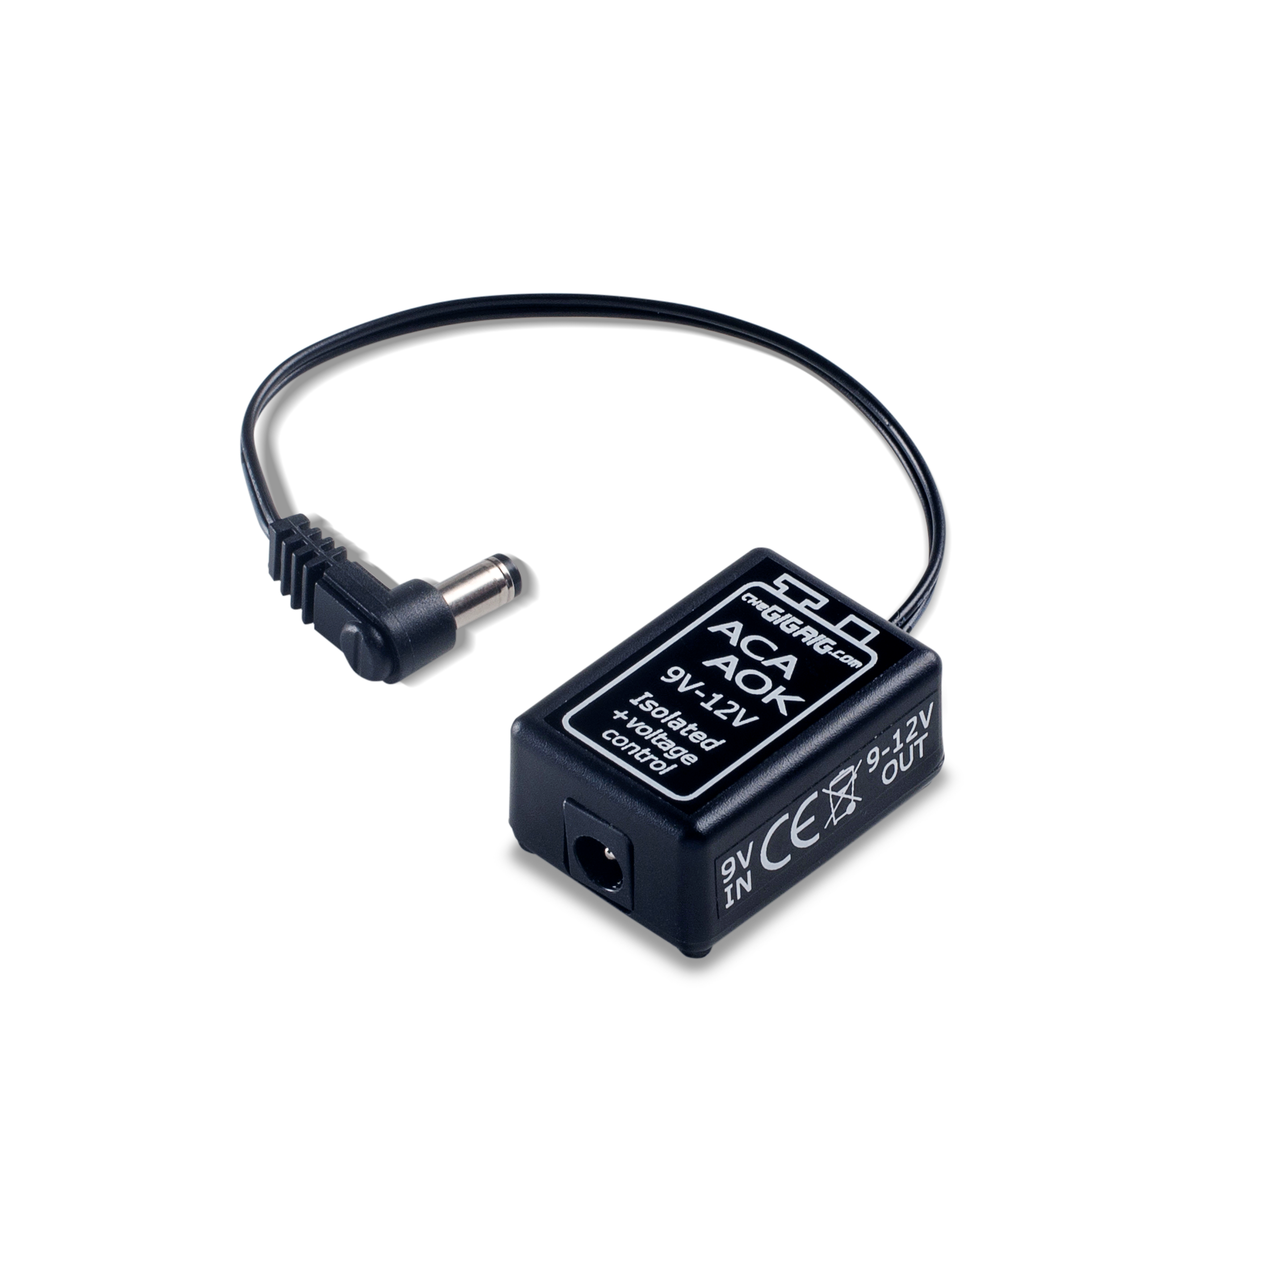 ACA-AOK: 9v to 12v Isolated Adapter with voltage control